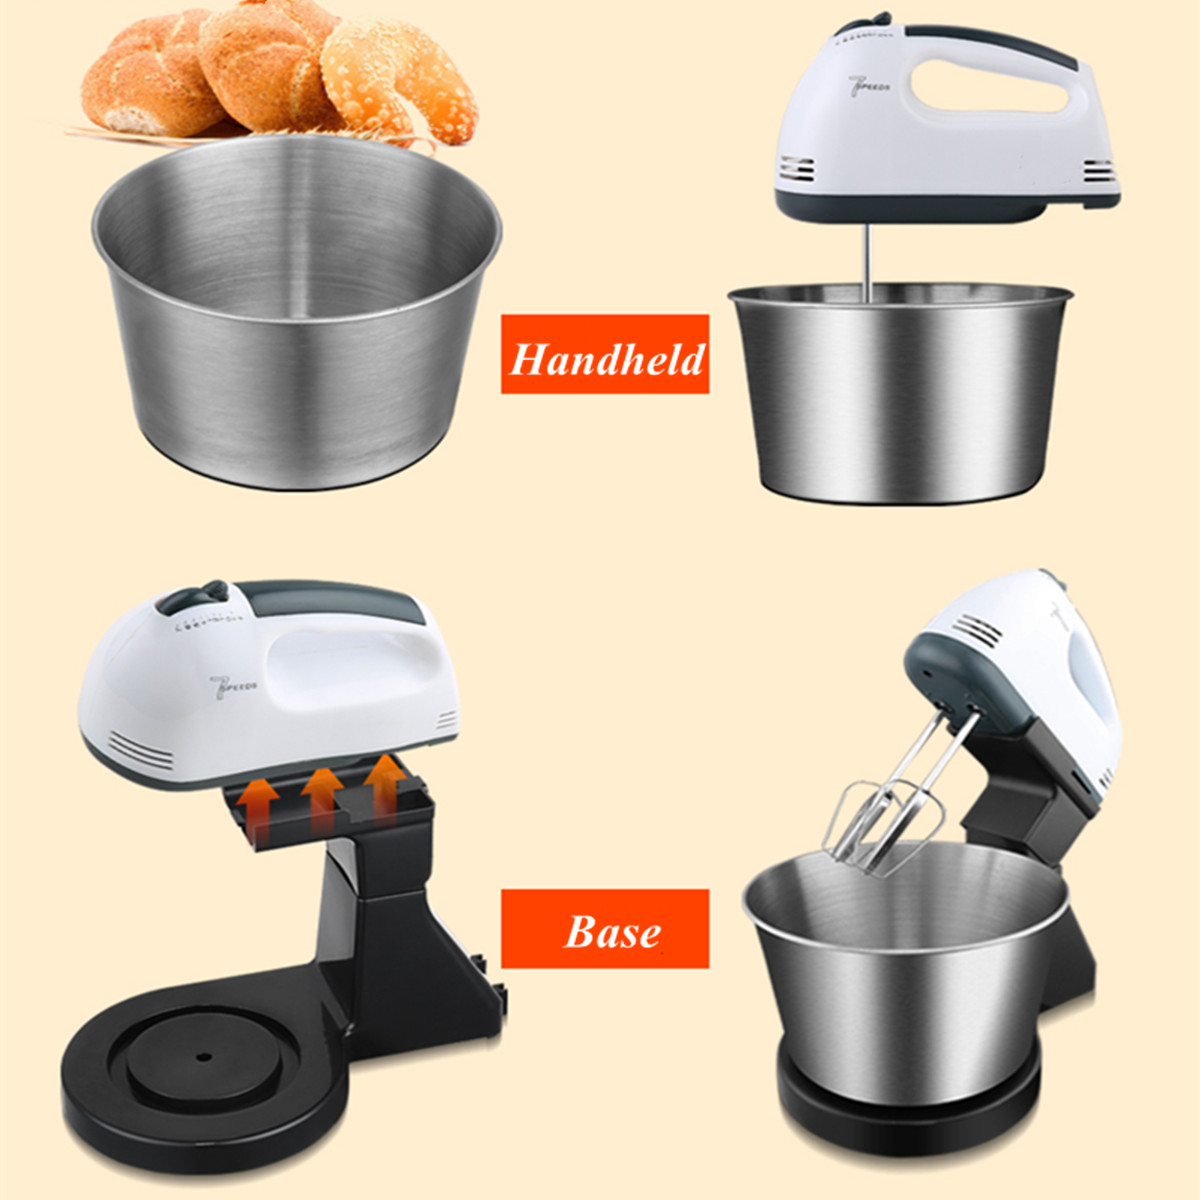 7 Speed Electric Egg Beater Dough Cakes Bread Egg Stand Mixer + Hand Blender + Bowl Food Mixer Kitchen Accessories Egg Tools 67